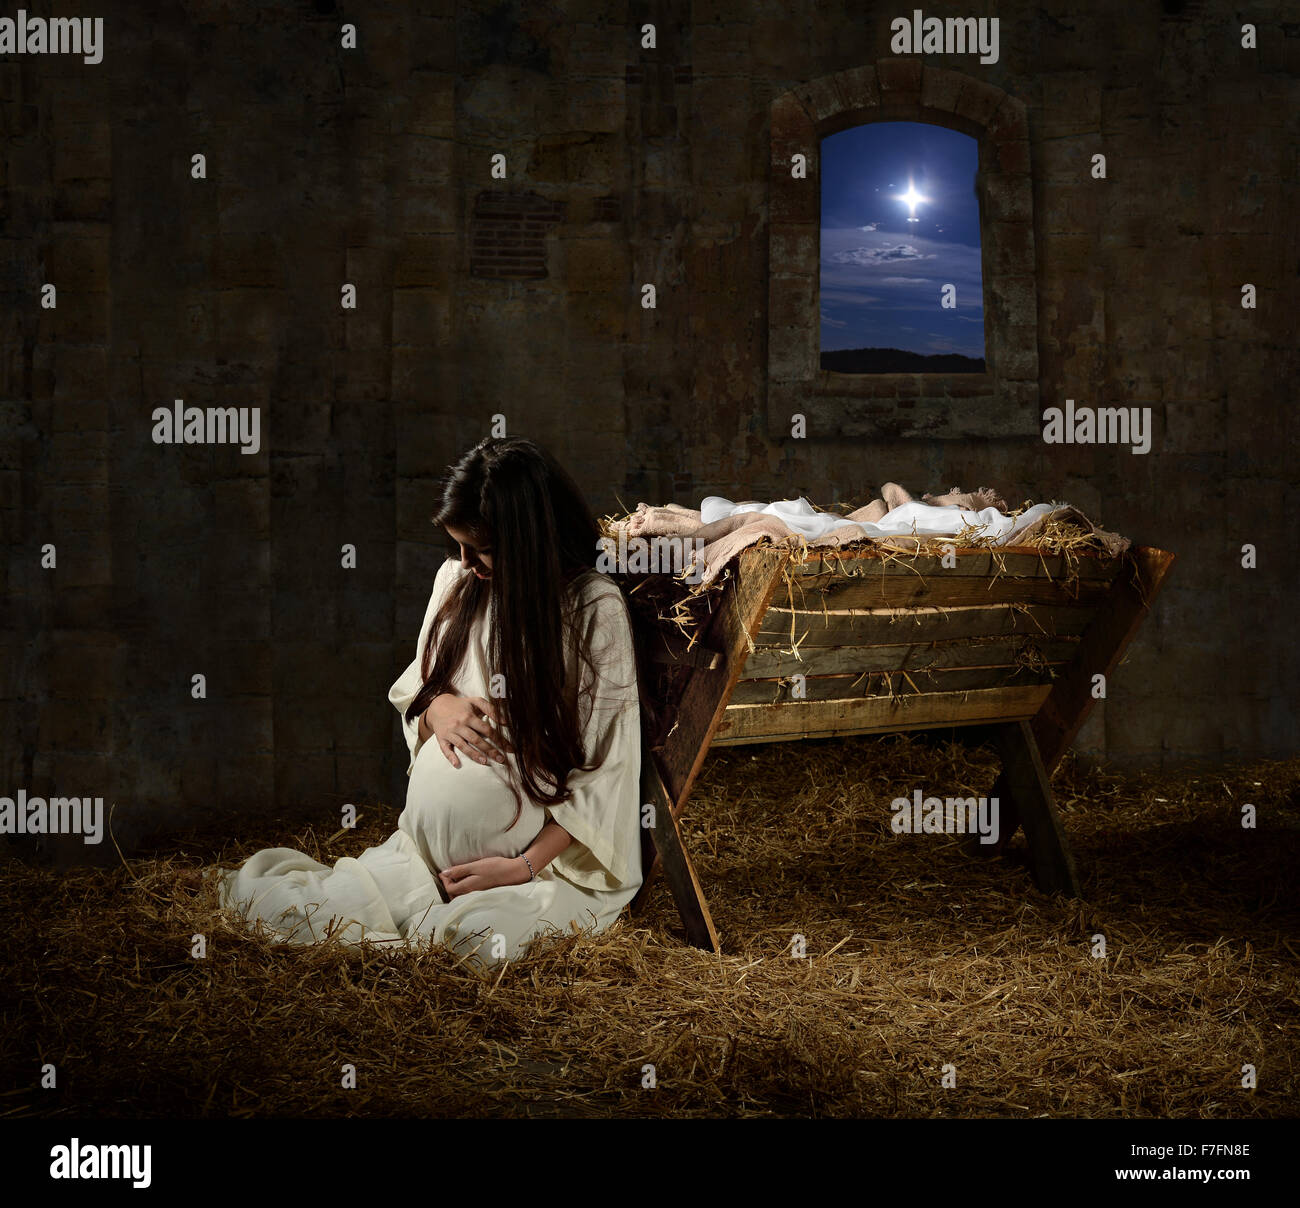 Young pregnant Mary praying leaning on manger on Christmas Eve Stock Photo